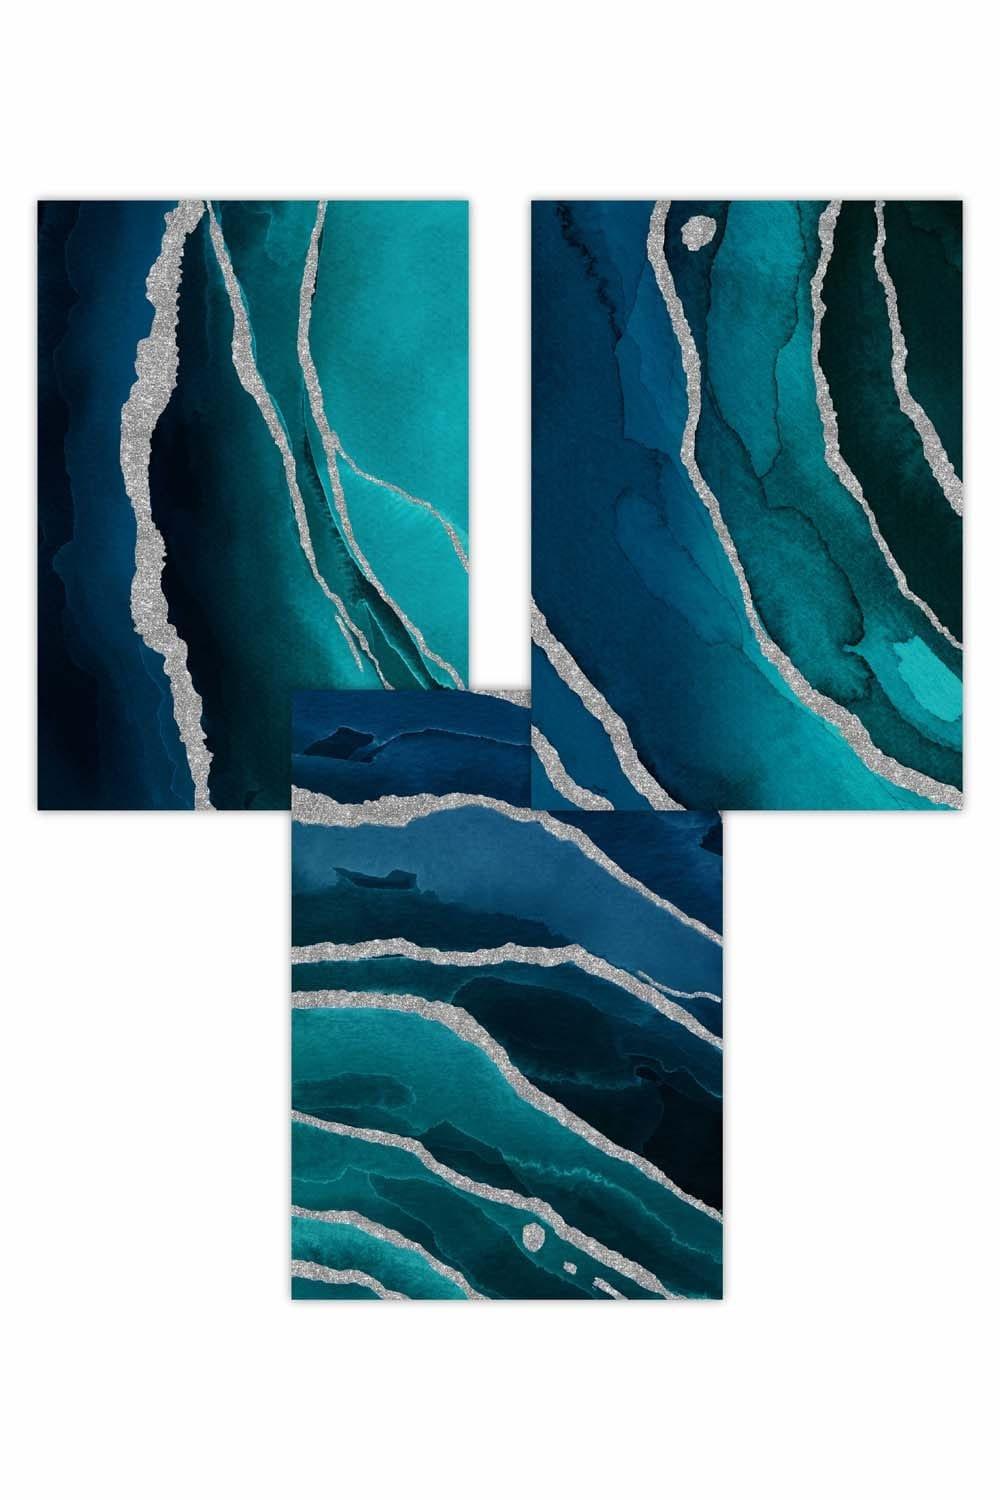 Set of 3 Abstract Teal Blue Silver Strokes Art Posters